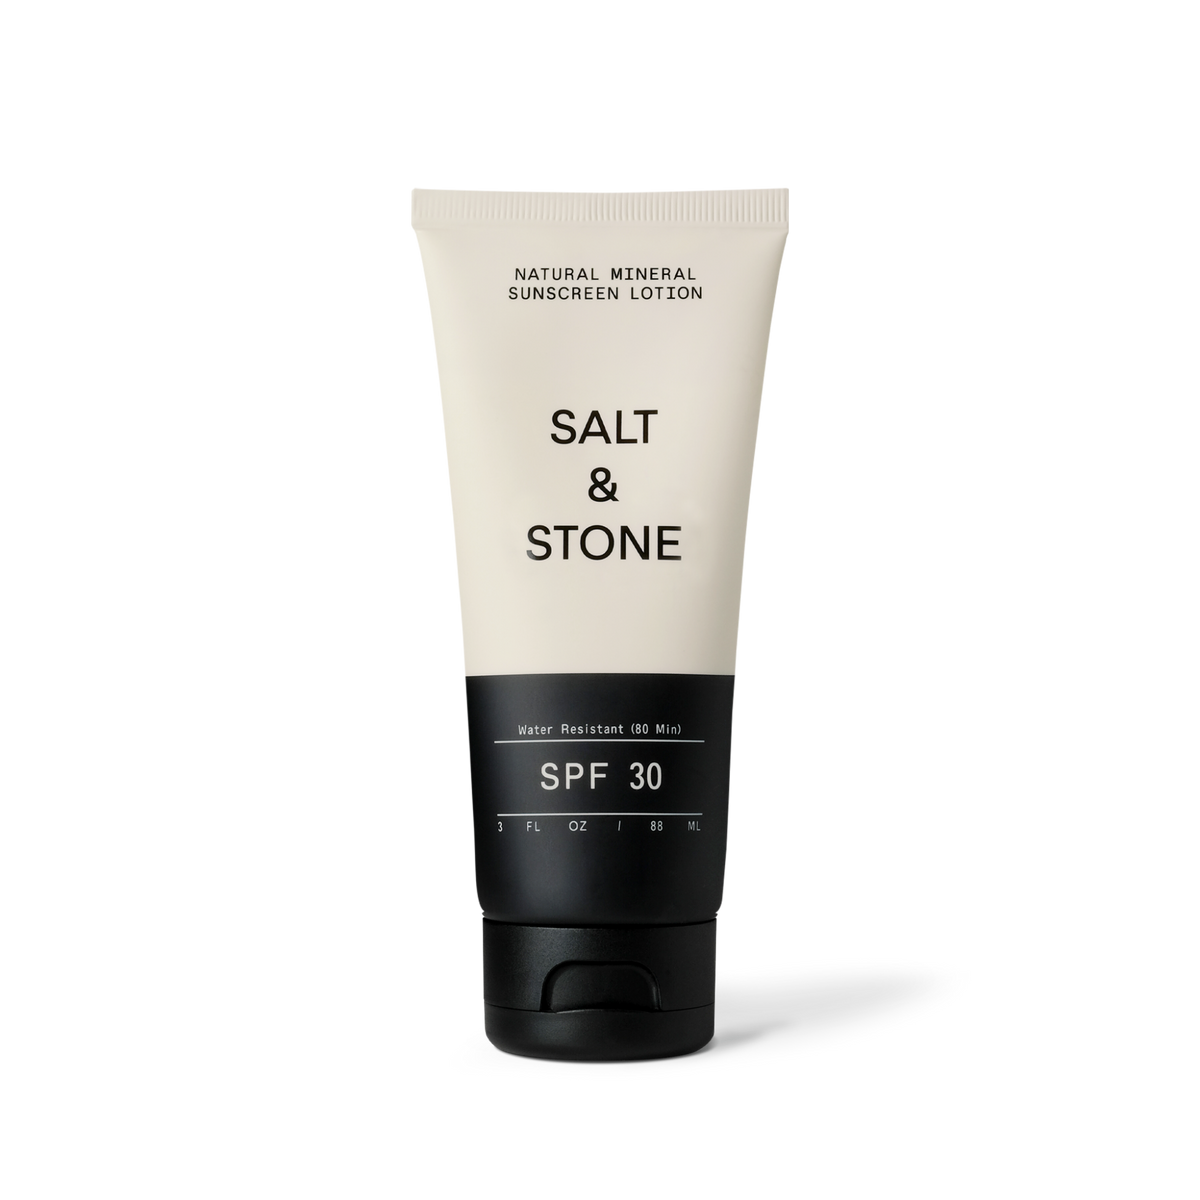 Primary Image of Natural Mineral Sunscreen Lotion SPF 30